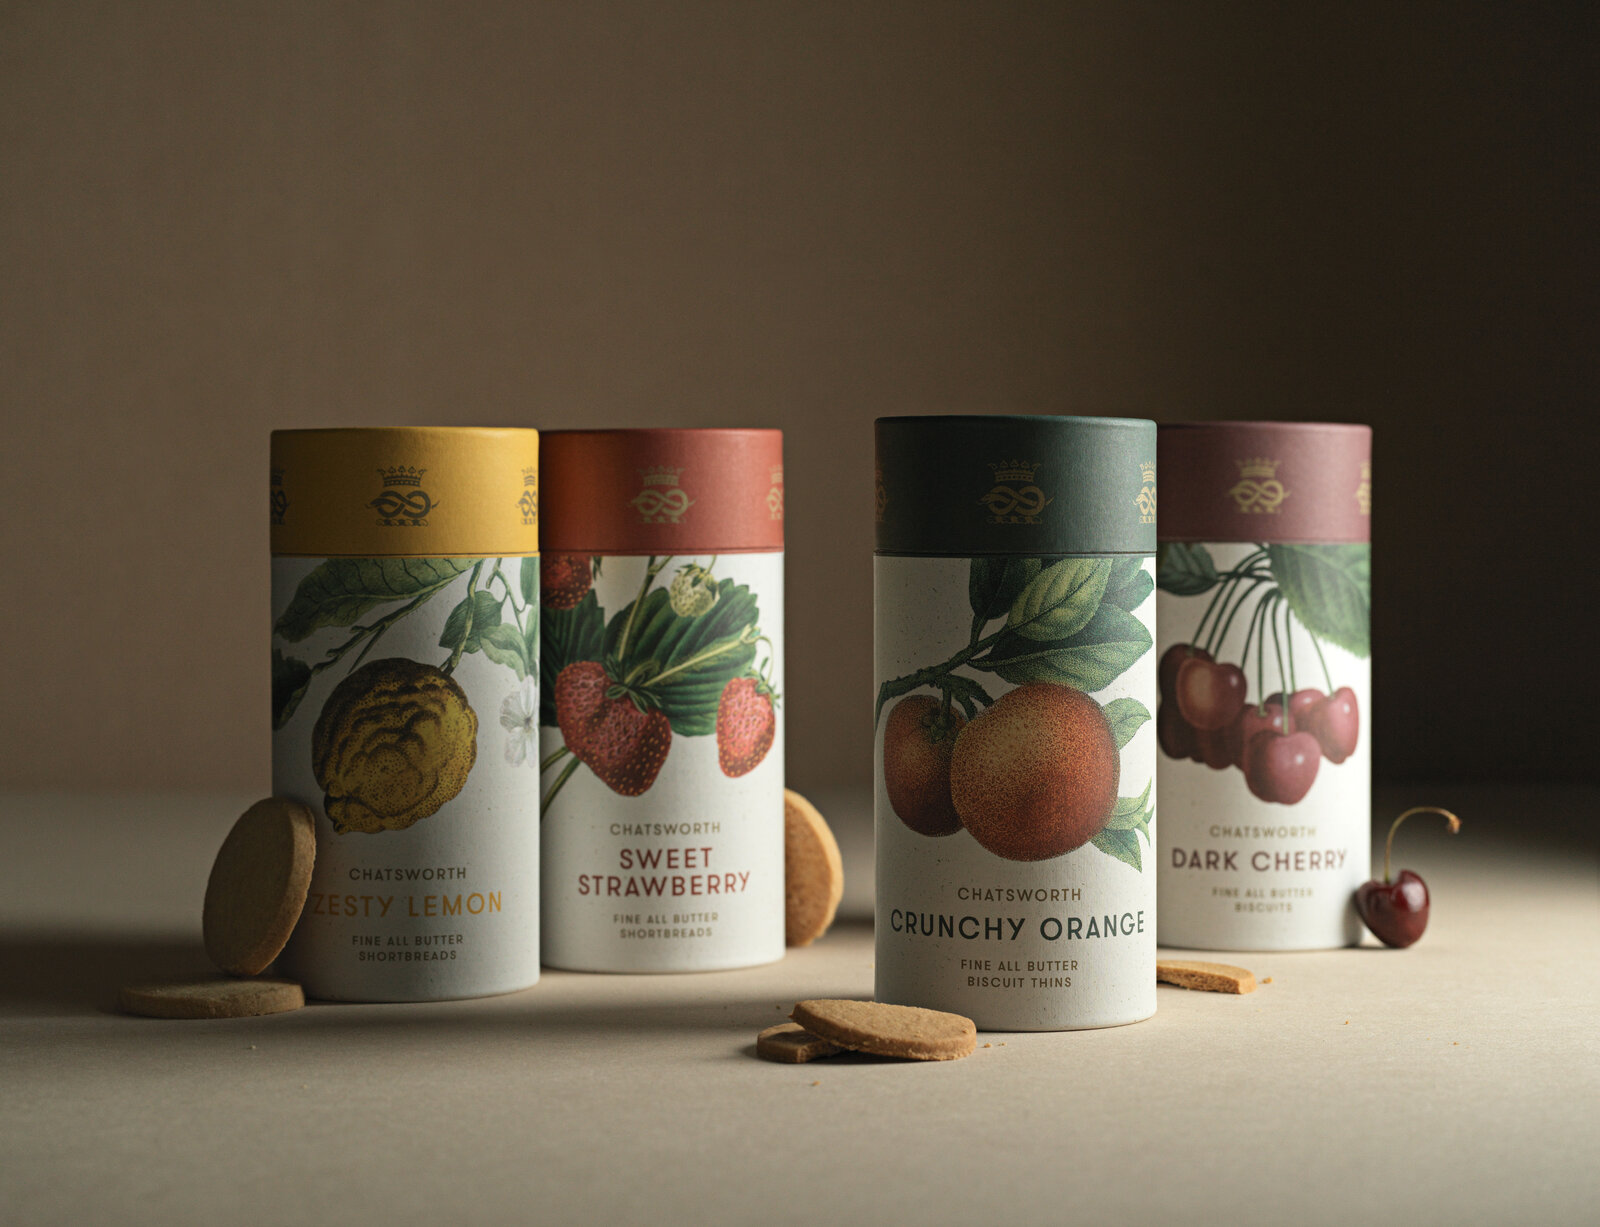 Shelf appeal - packaging that tells an authentic story and that sells itself